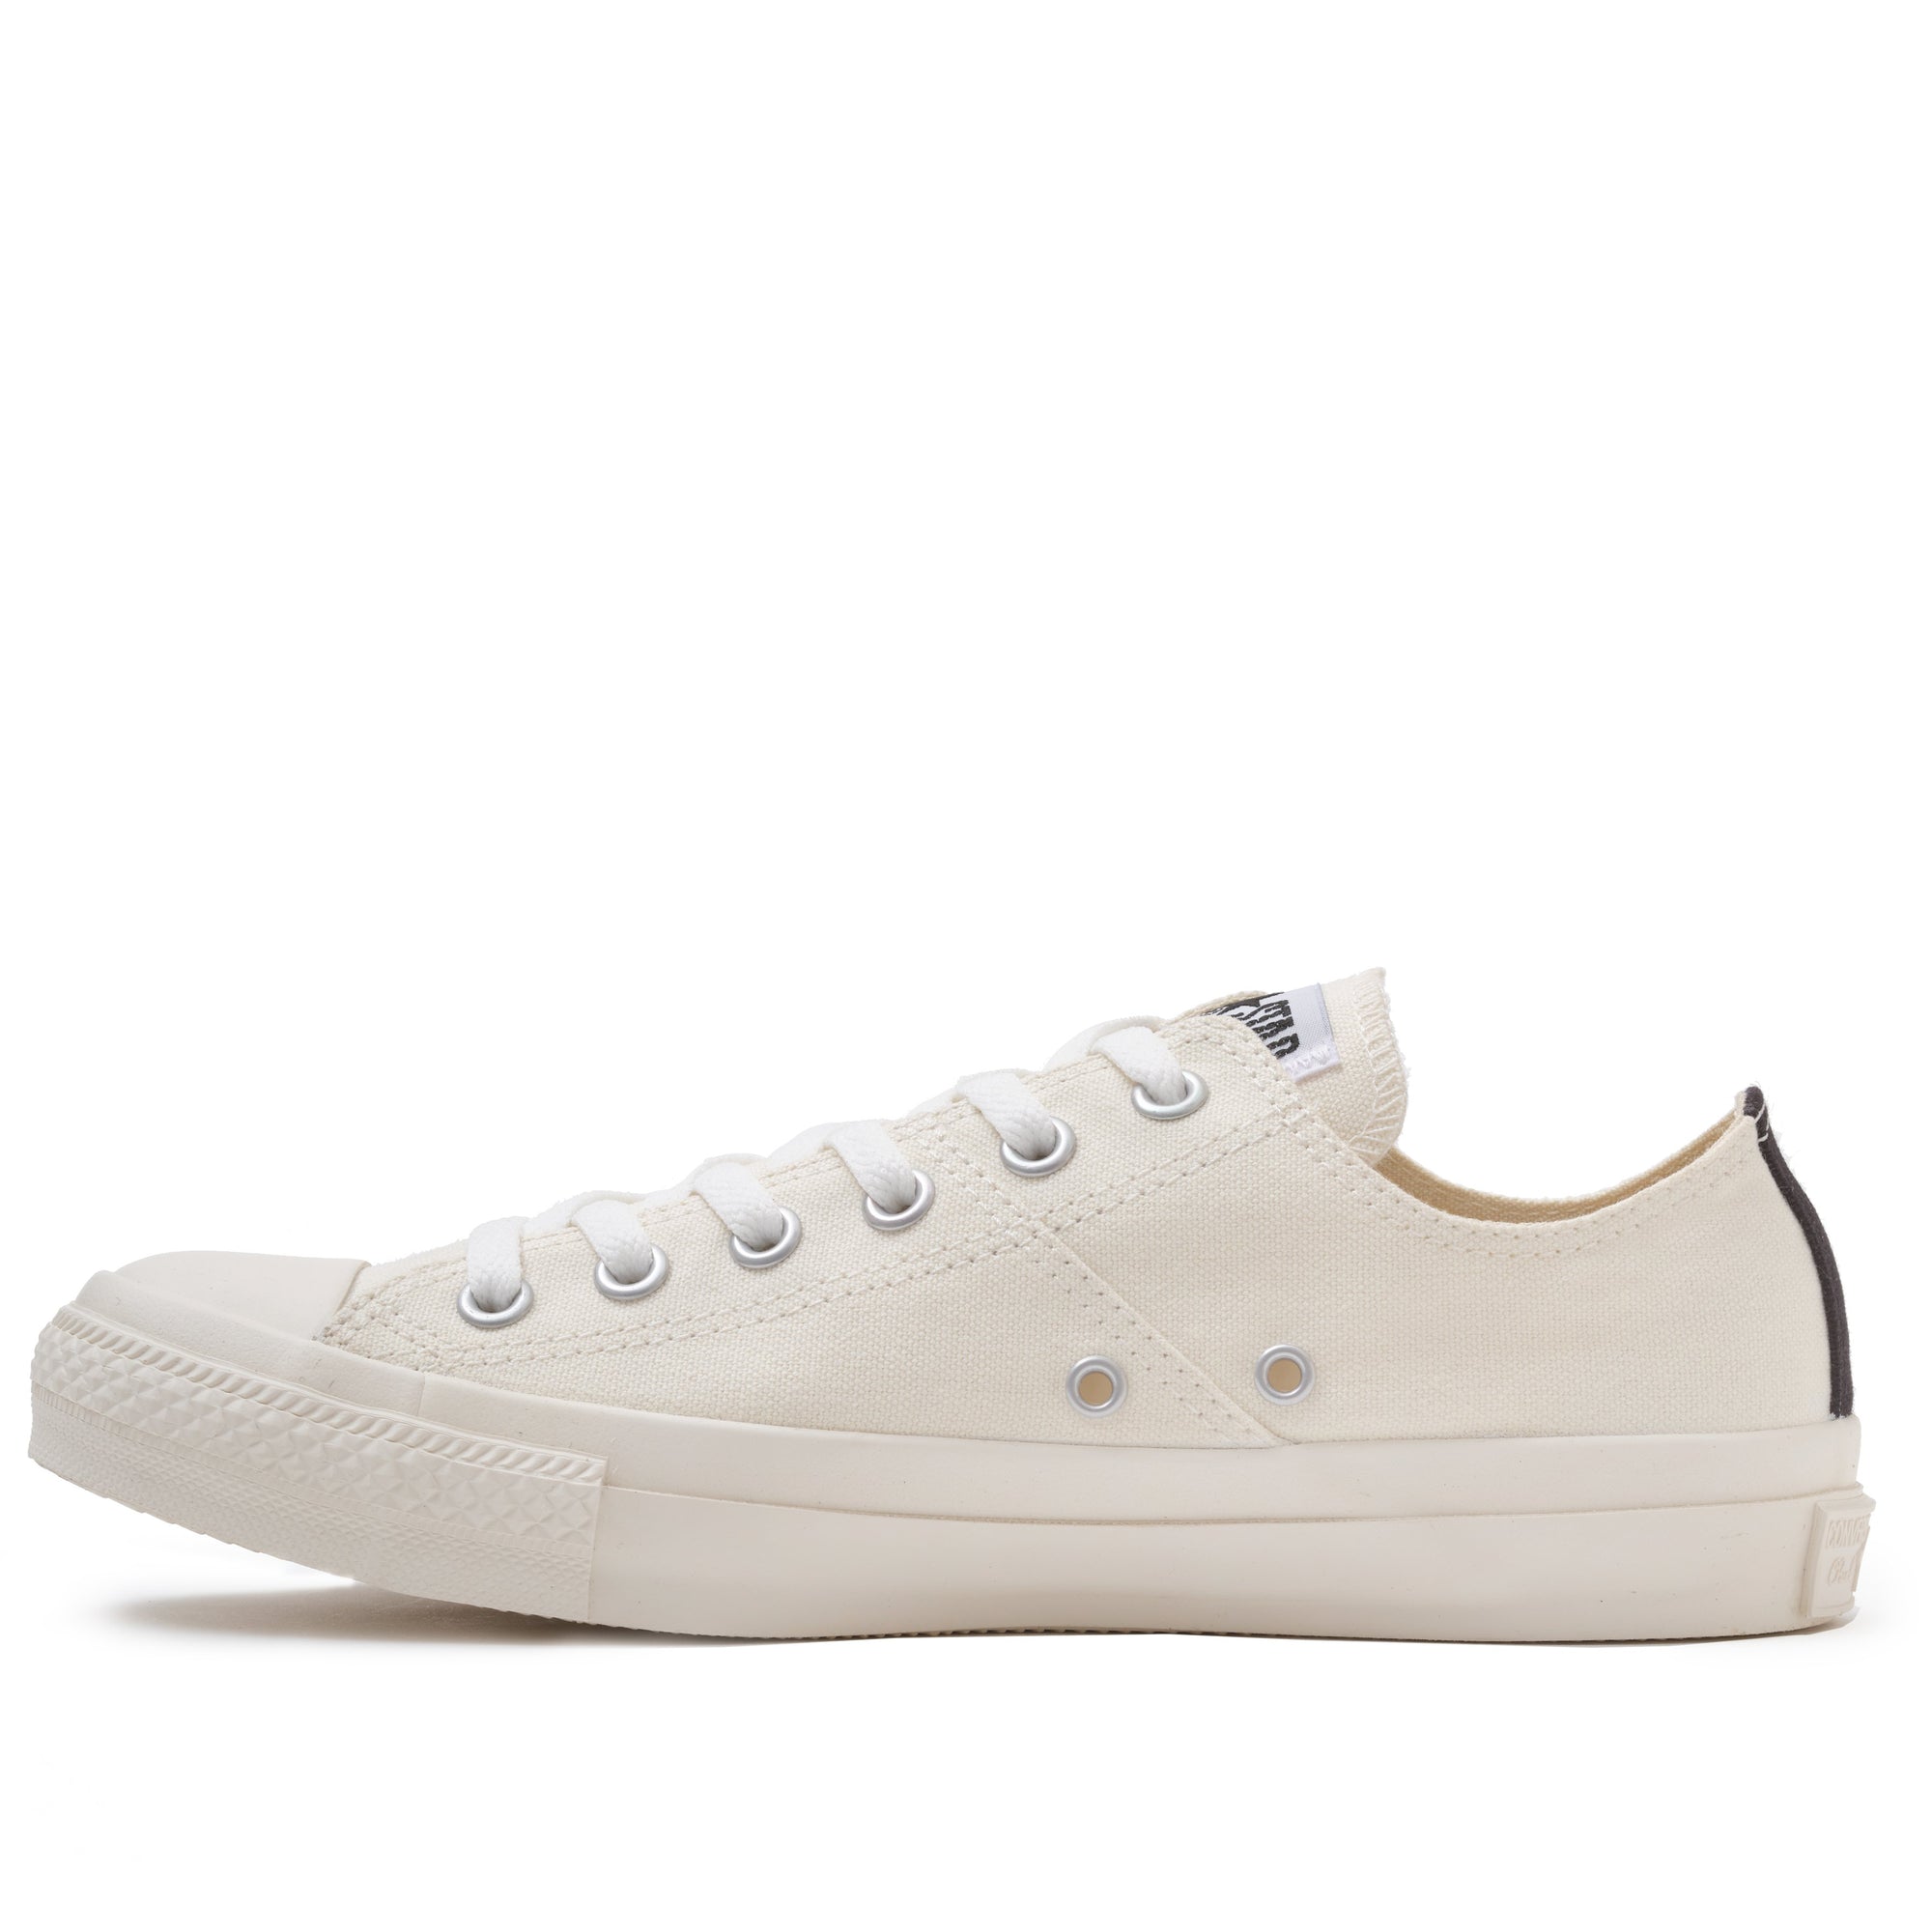 PLAY CDG CONVERSE - ALL STAR LOW - (WHITE) view 2